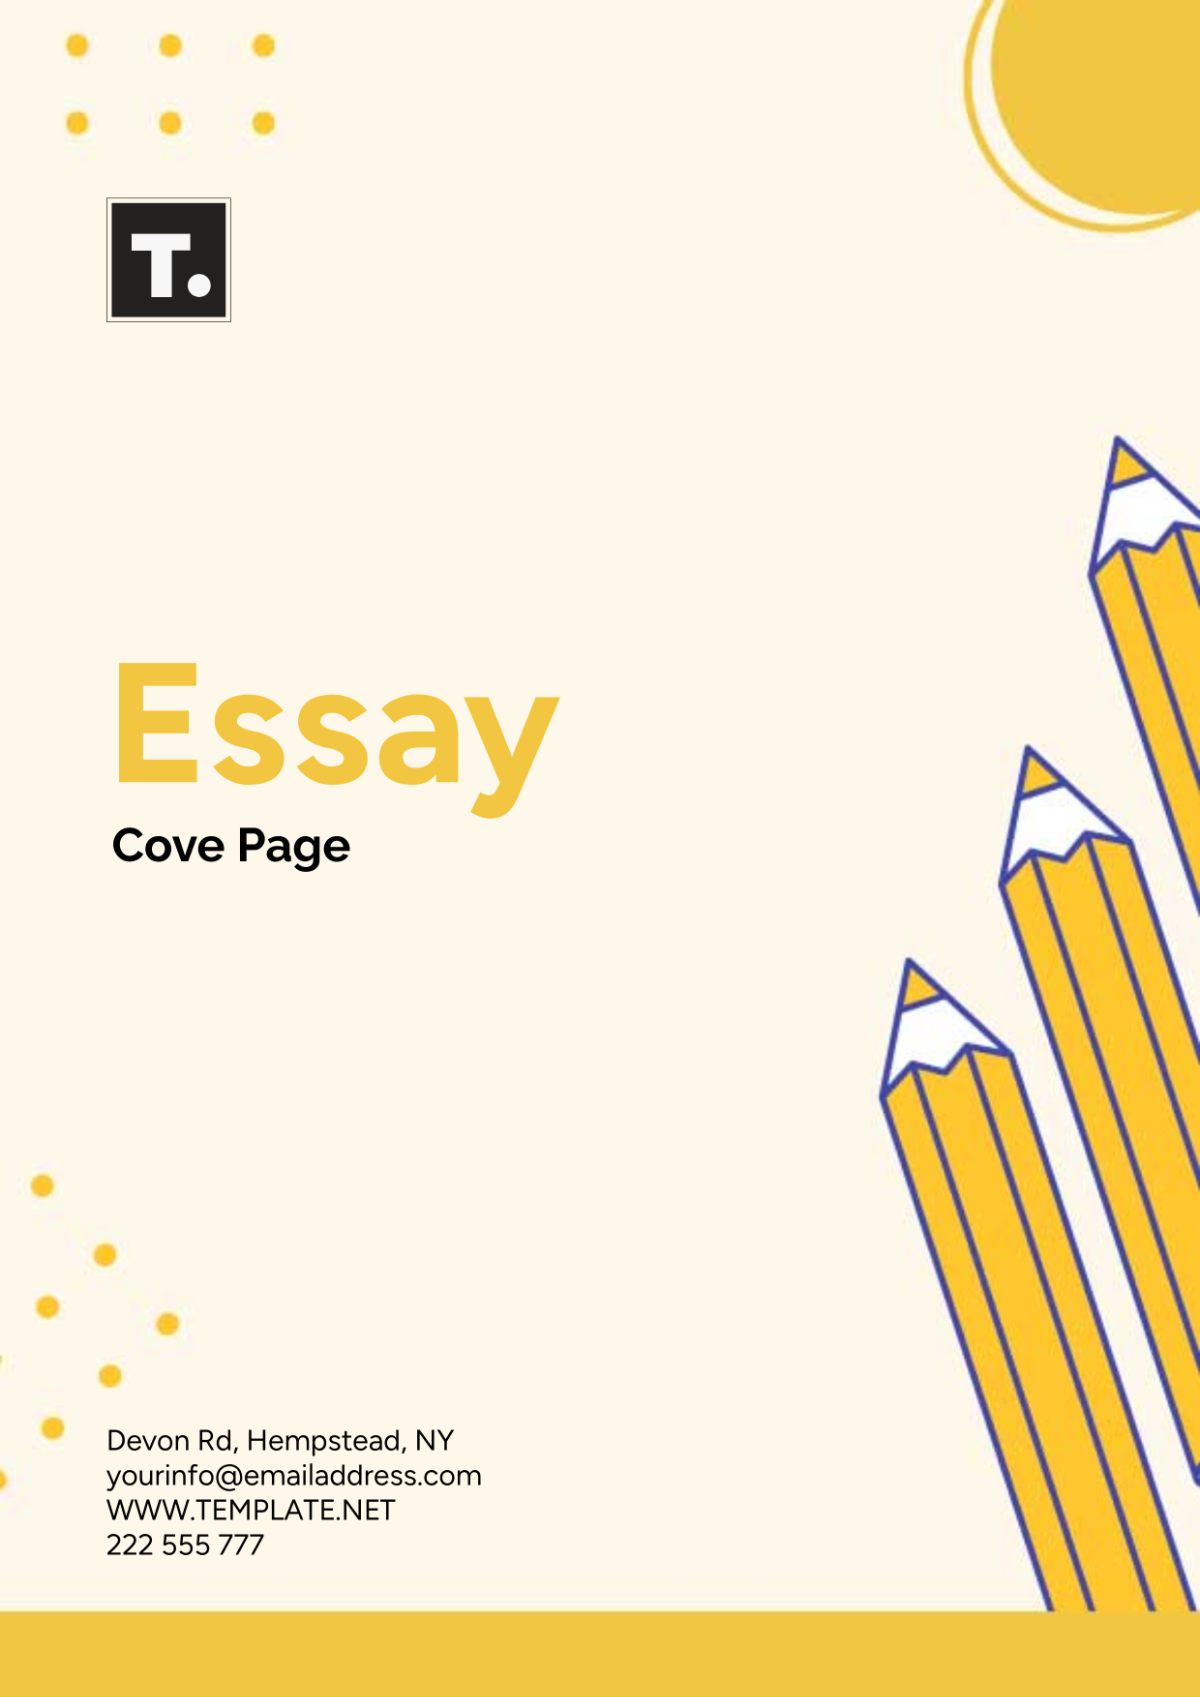 Essay Cover Page